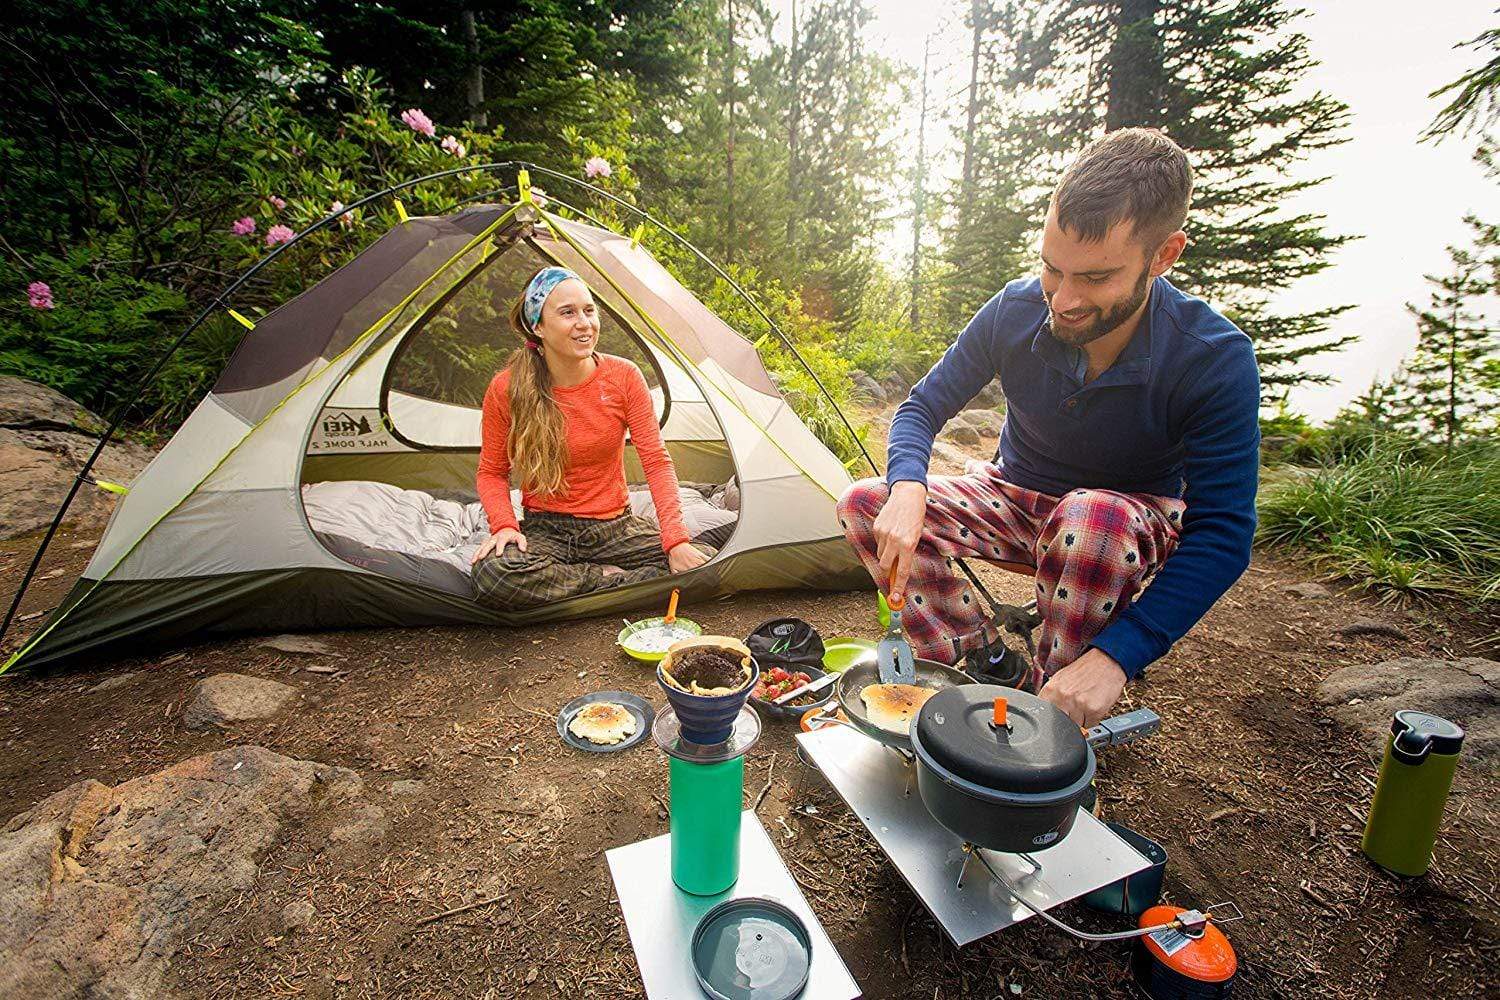 Megan and John Using The GSI Outdoors - Collapsible JavaDrip Slim Drip Pour Over Camping Coffee Maker While Camping In The  Woods